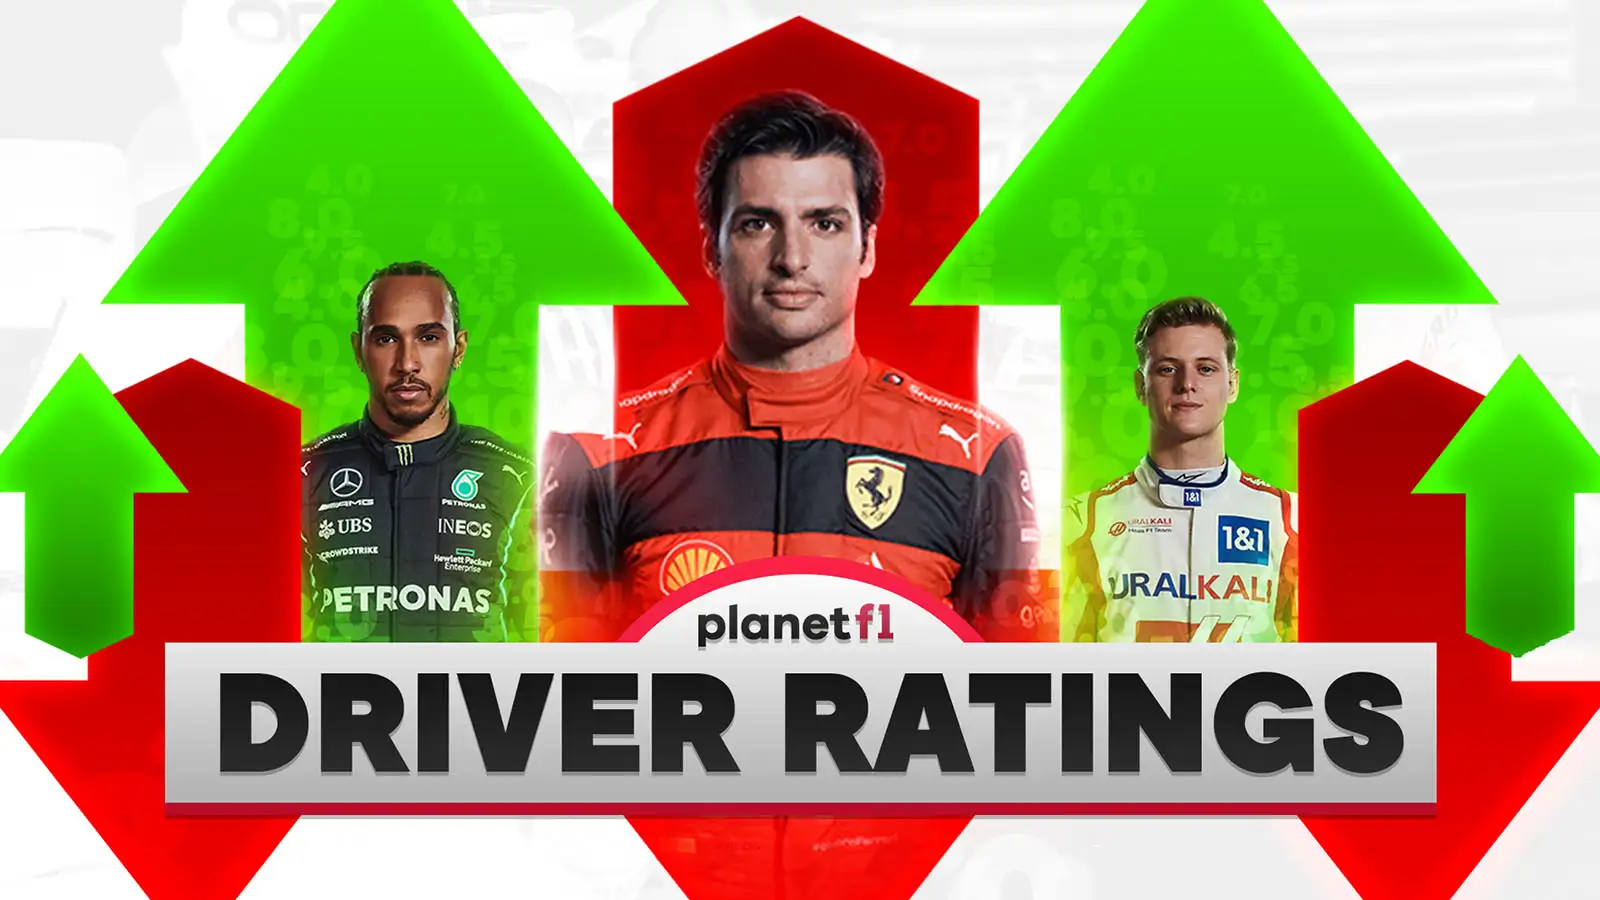 Driver ratings for the British Grand Prix